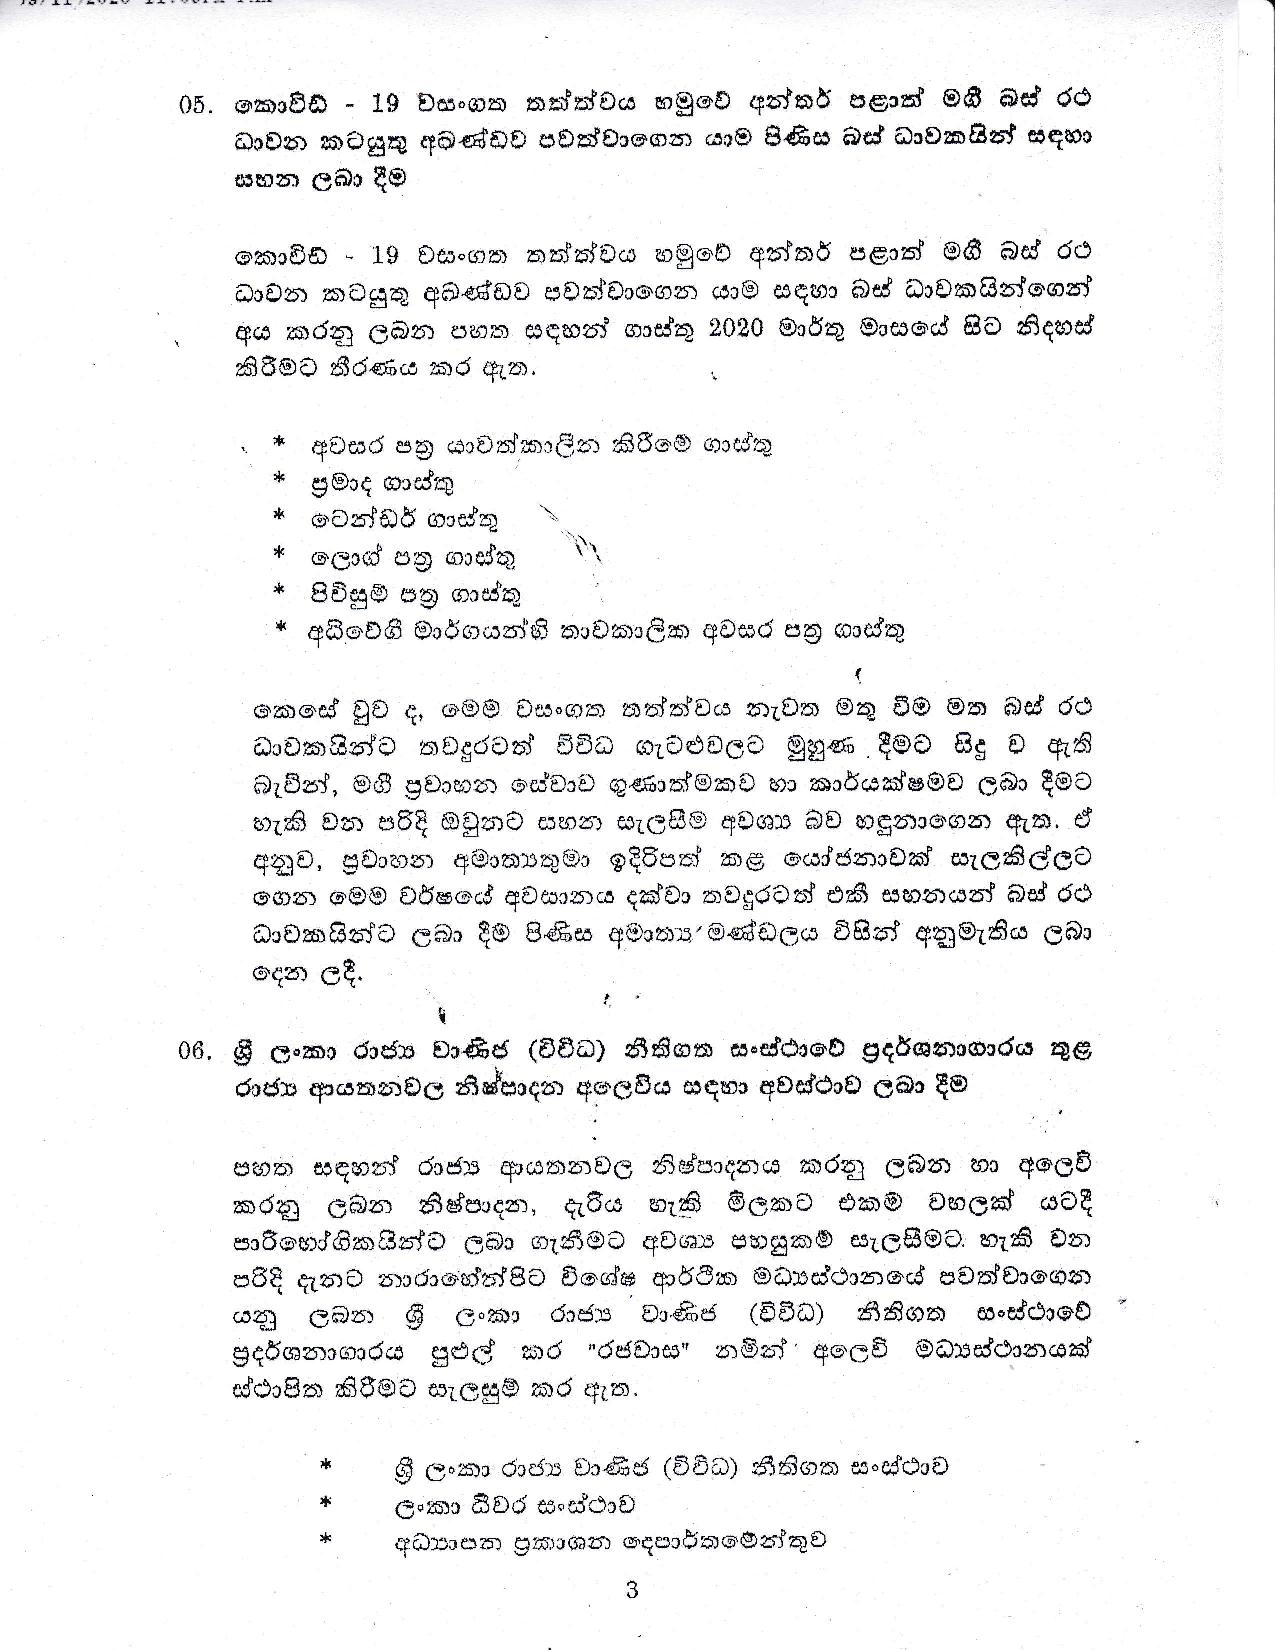 Cabinet Decision on 09.11.2020 page 003